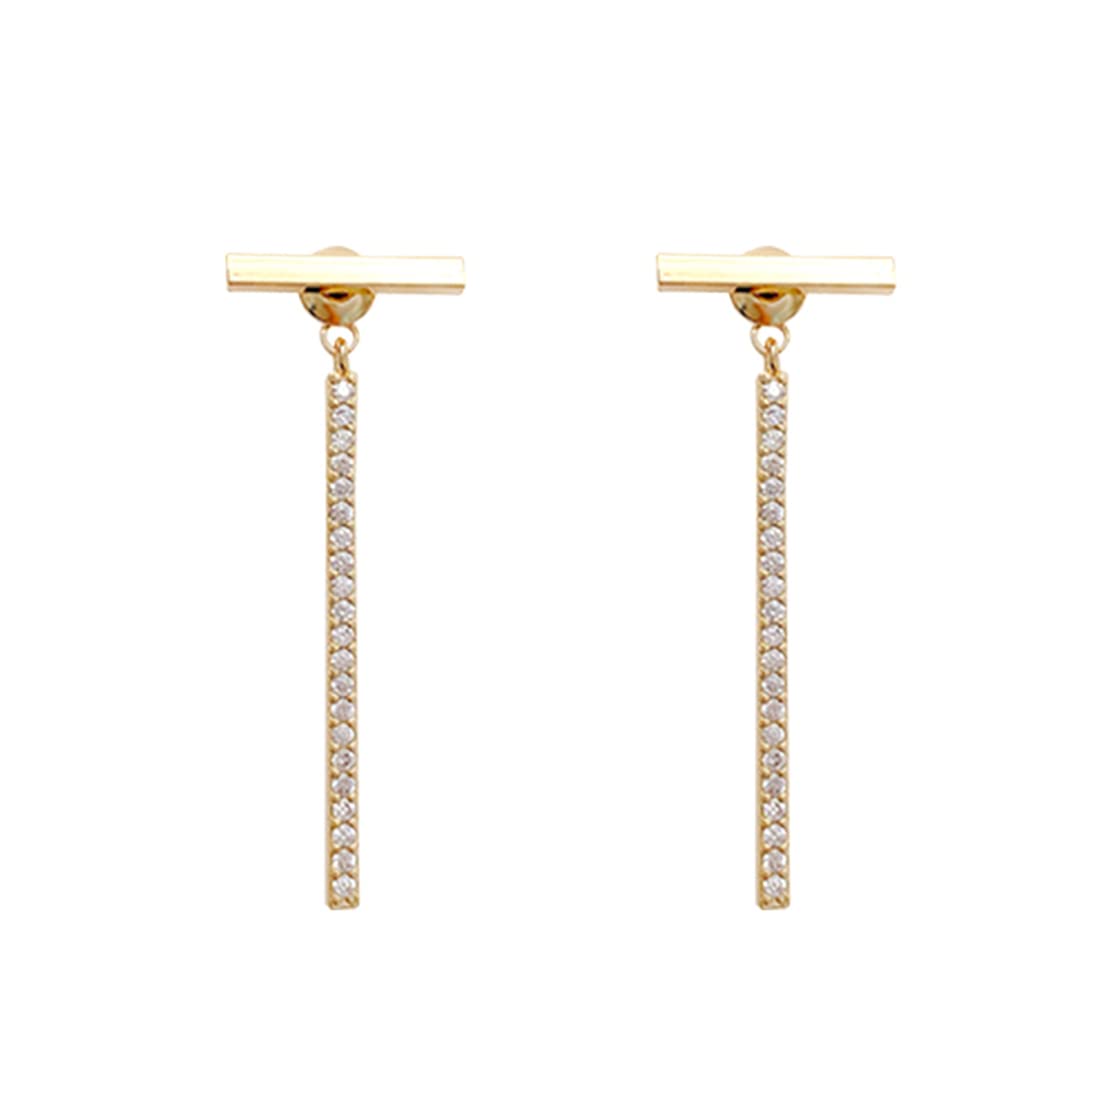 Yellow Chimes Earrings For Women Gold Tone Stud With Linear Crystal Studded Chain Back Drop Earrings For Women and Girls